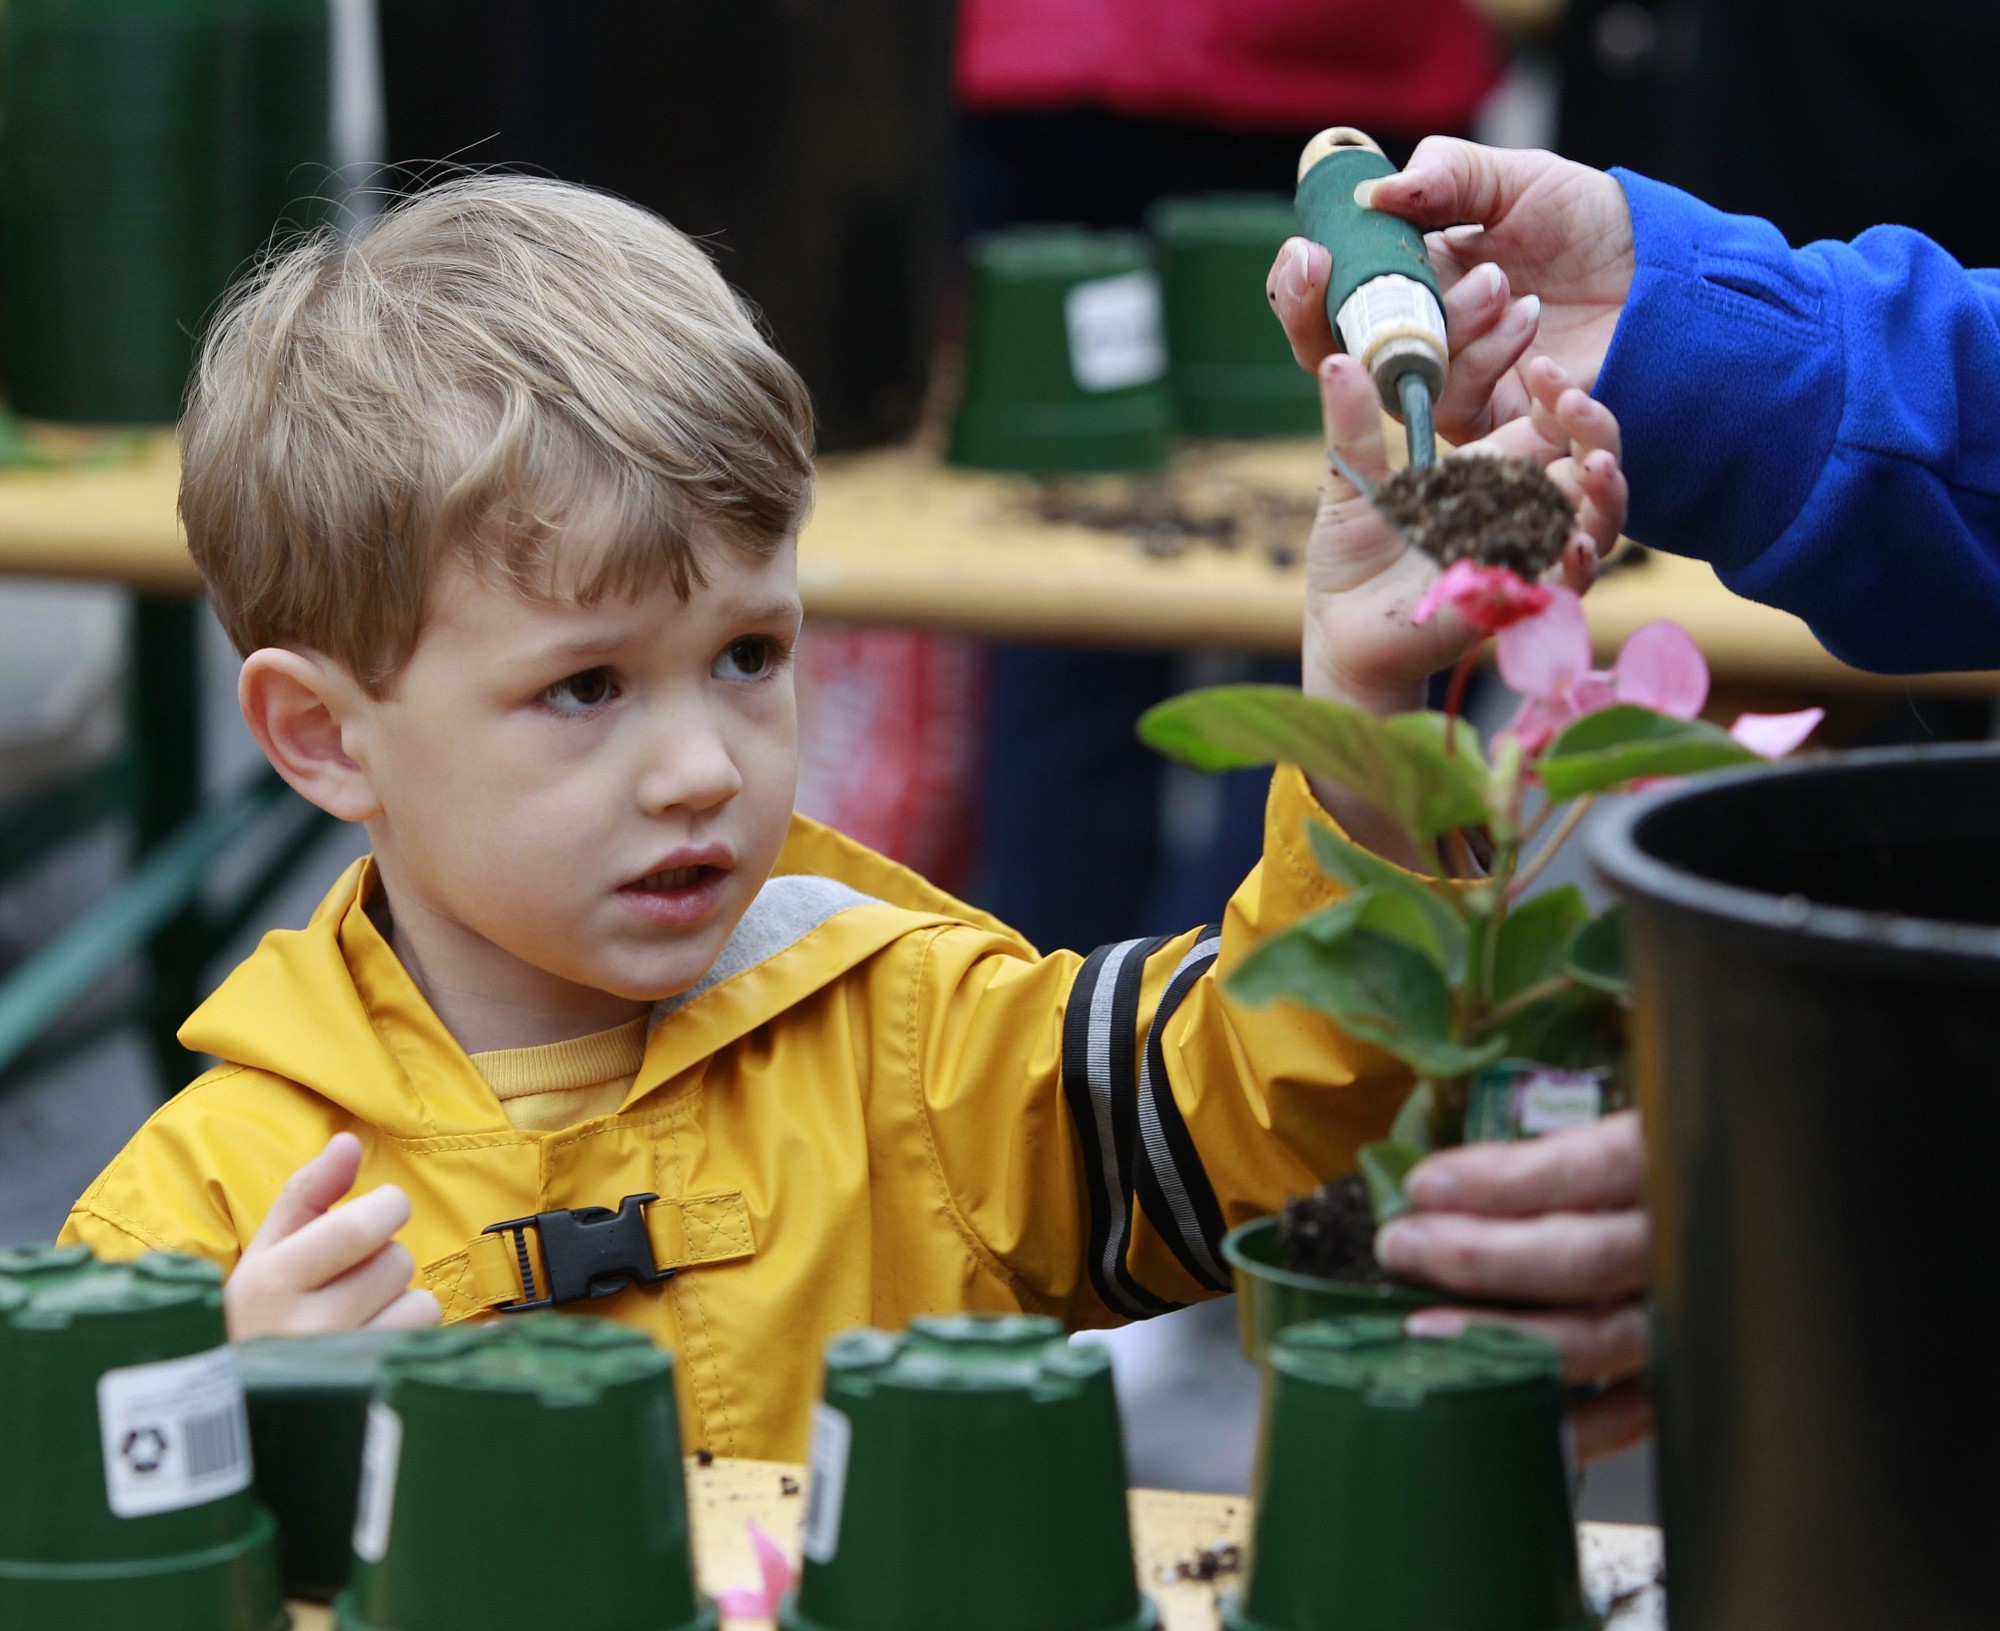 Jett Lader, 4, plants a flower at the St. Paddy's for Kids celebration Saturday at Shorty's Garden and Home.